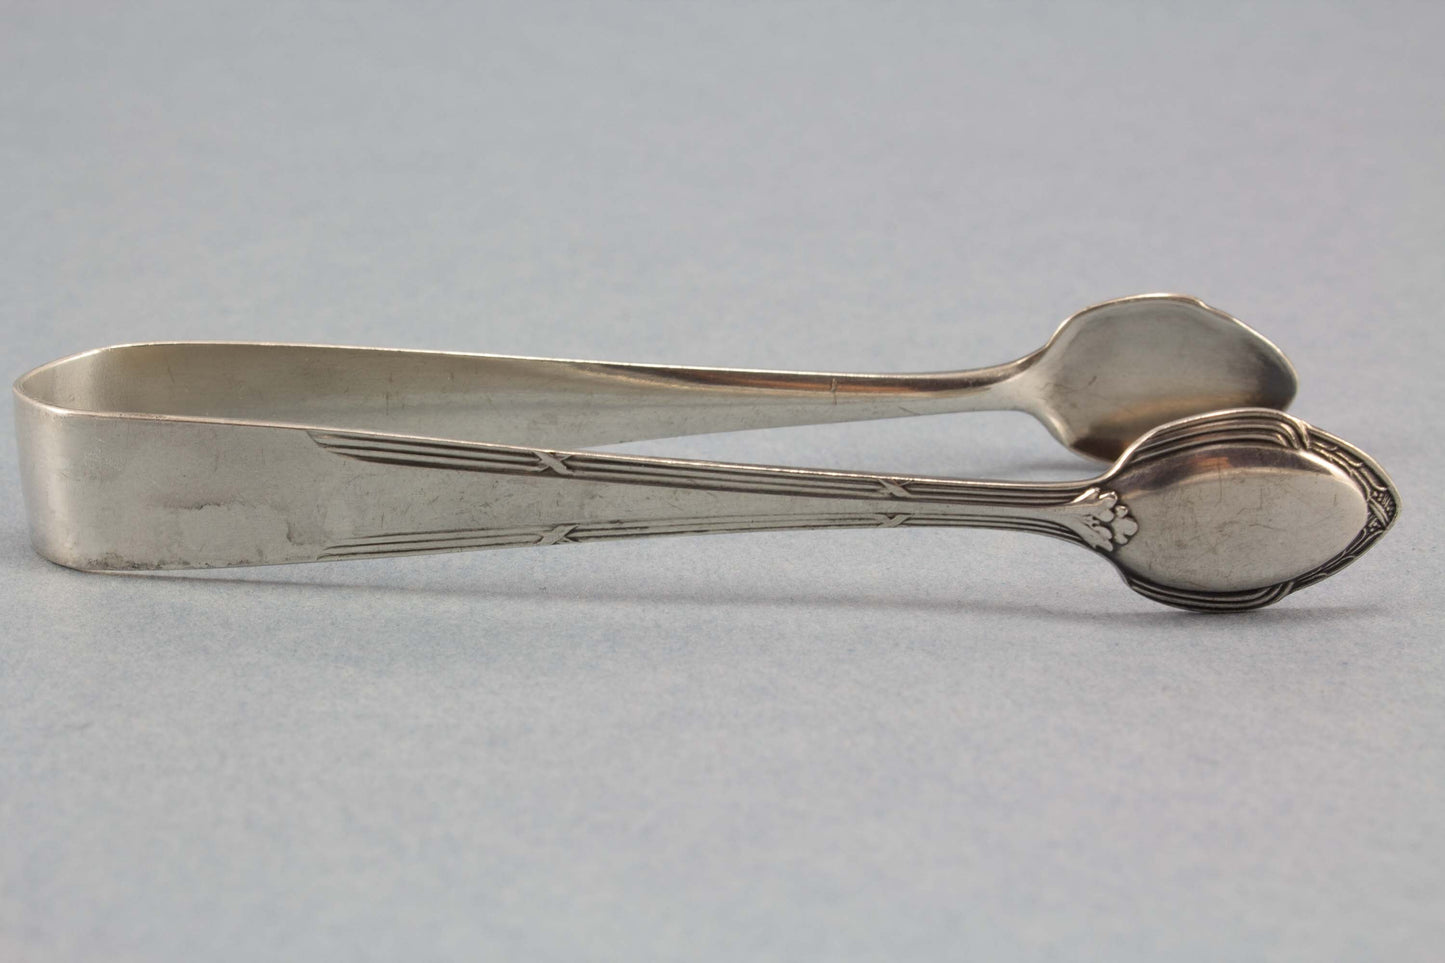 Sugar tongs, Art Nouveau, old tongs, silver-plated, WMF 200, antique